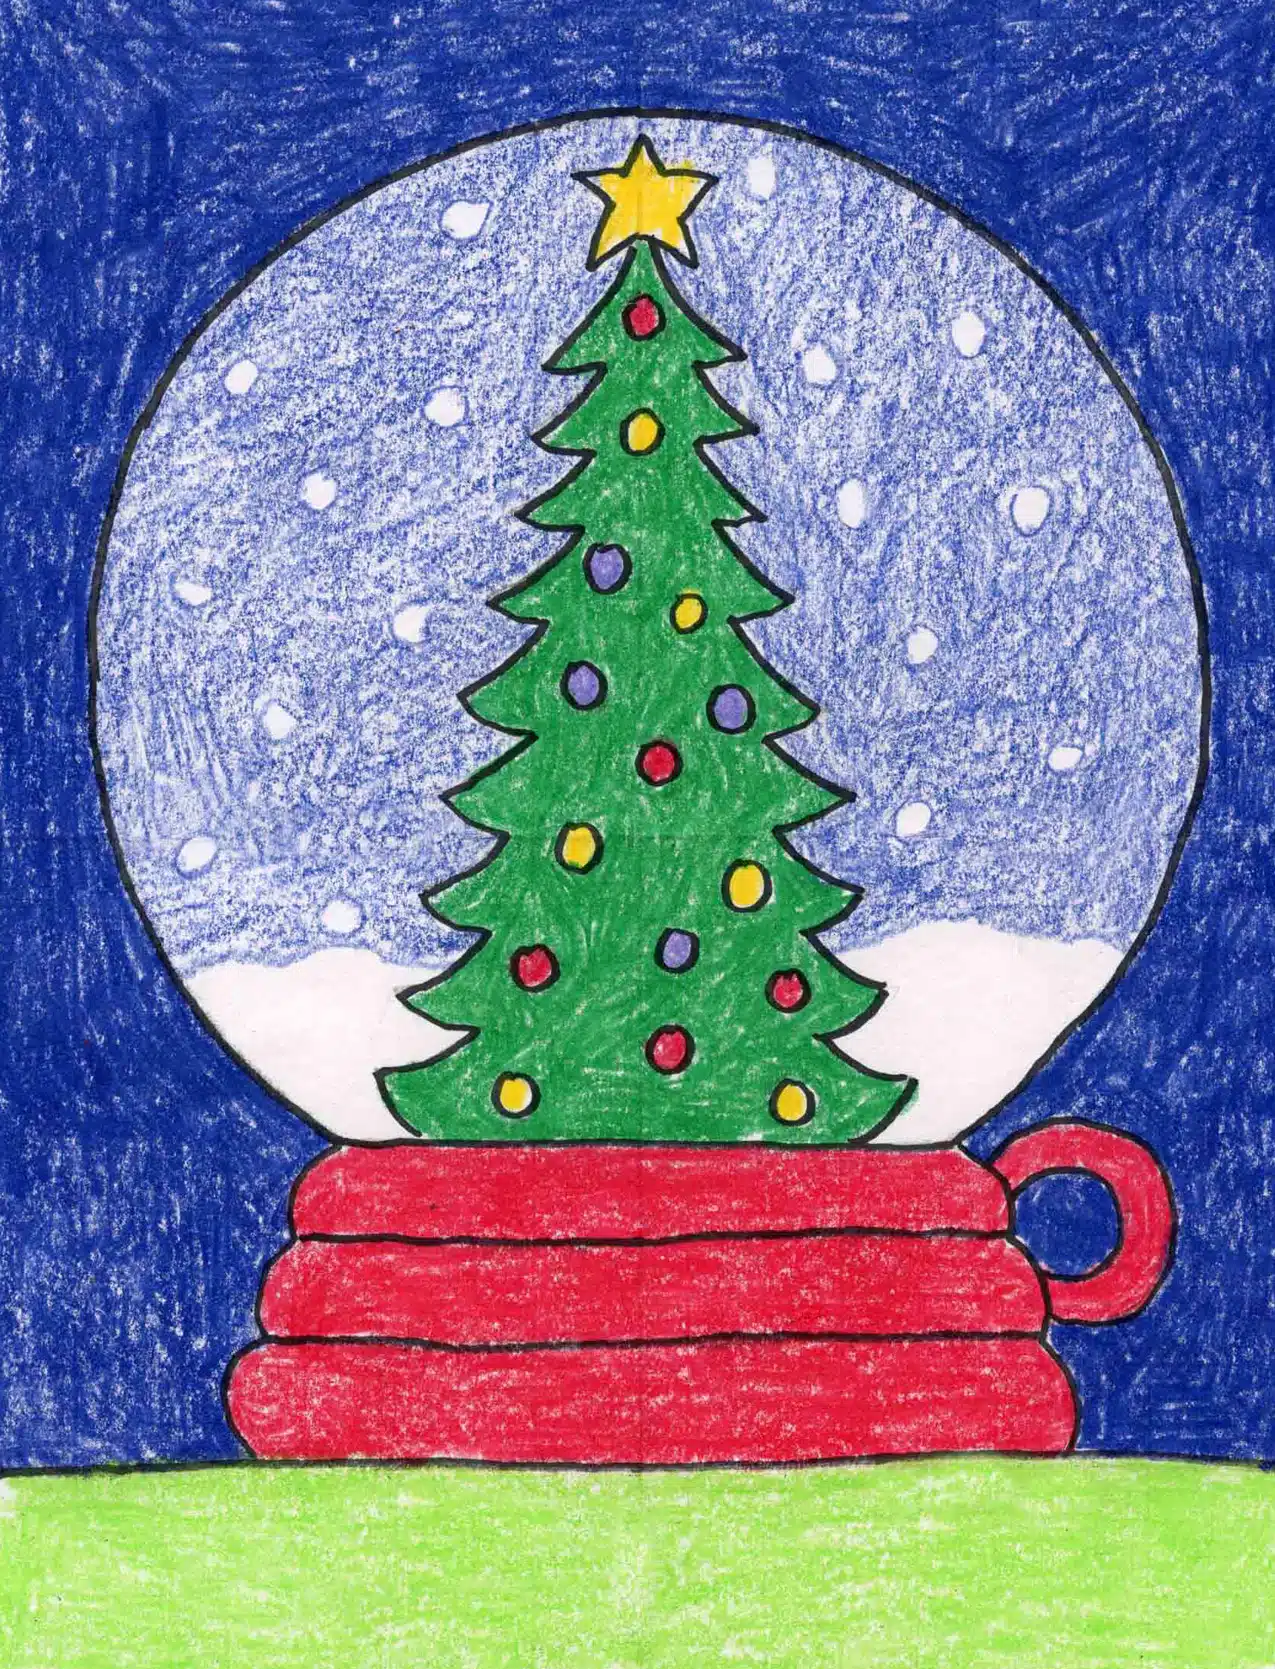 Easy How to Draw a Snow Globe Tutorial Video and Snow Globe Coloring Page